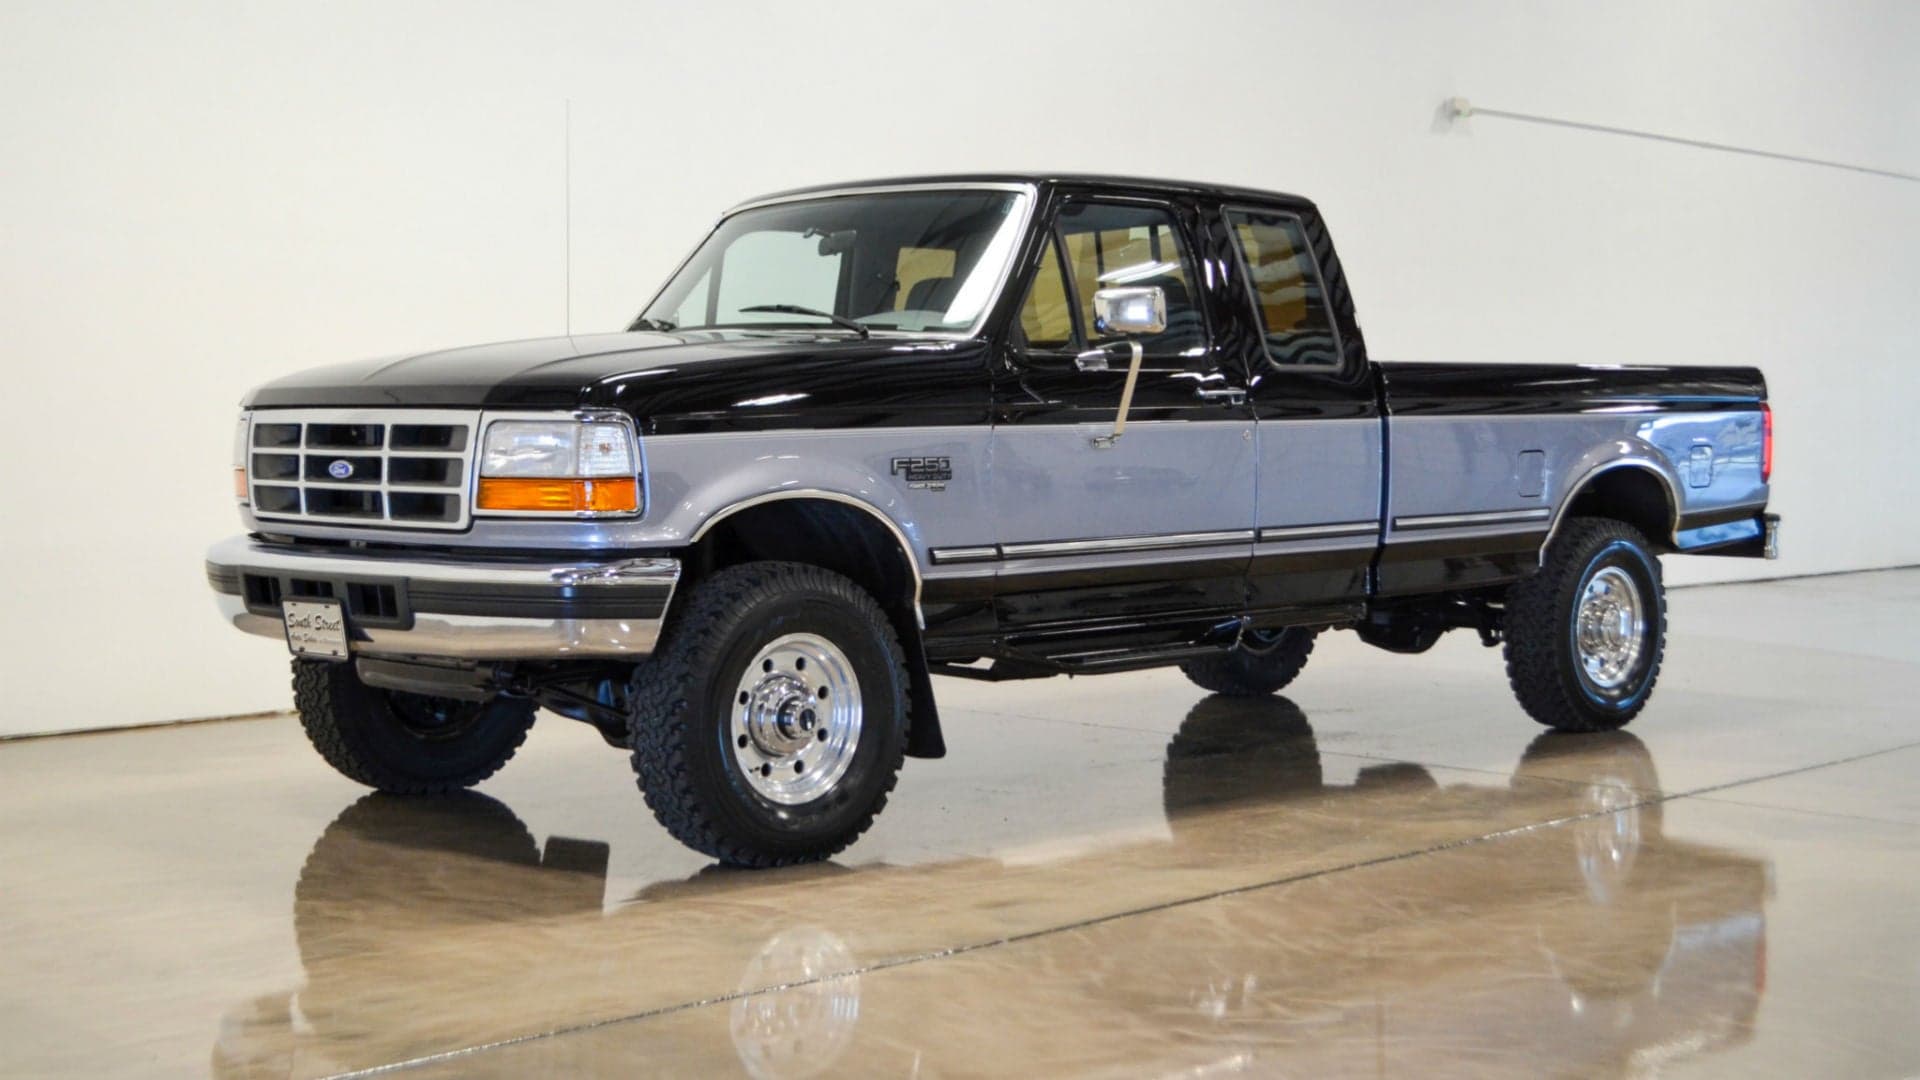 Buy Pickup Perfection With This 49K-Mile 1997 Ford F-250 Power Stroke Diesel